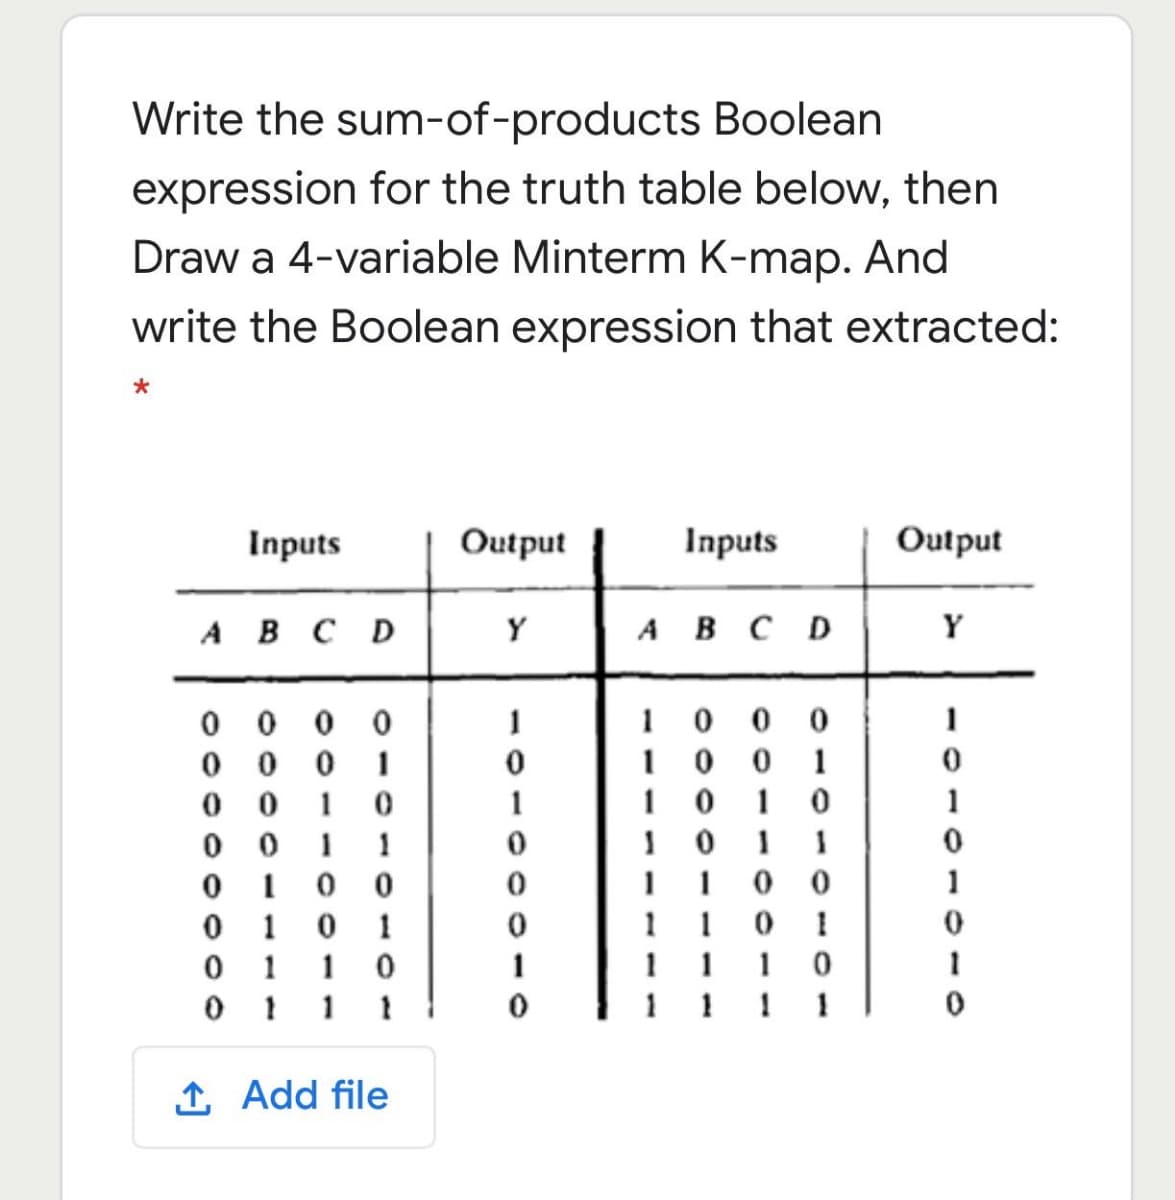 Write the sum-of-products Boolean
expression for the truth table below, then
Draw a 4-variable Minterm K-map. And
write the Boolean expression that extracted:
Inputs
Output
Inputs
Output
A B C D
Y
A B C D
Y
0 0 0 0
0 0
1
1
1
1
1
1 0 1 0
1
1
1
1
0 0
I 1 0 0
1
1
1
1
1
1
1
1
1 1 1 1
1 Add file
